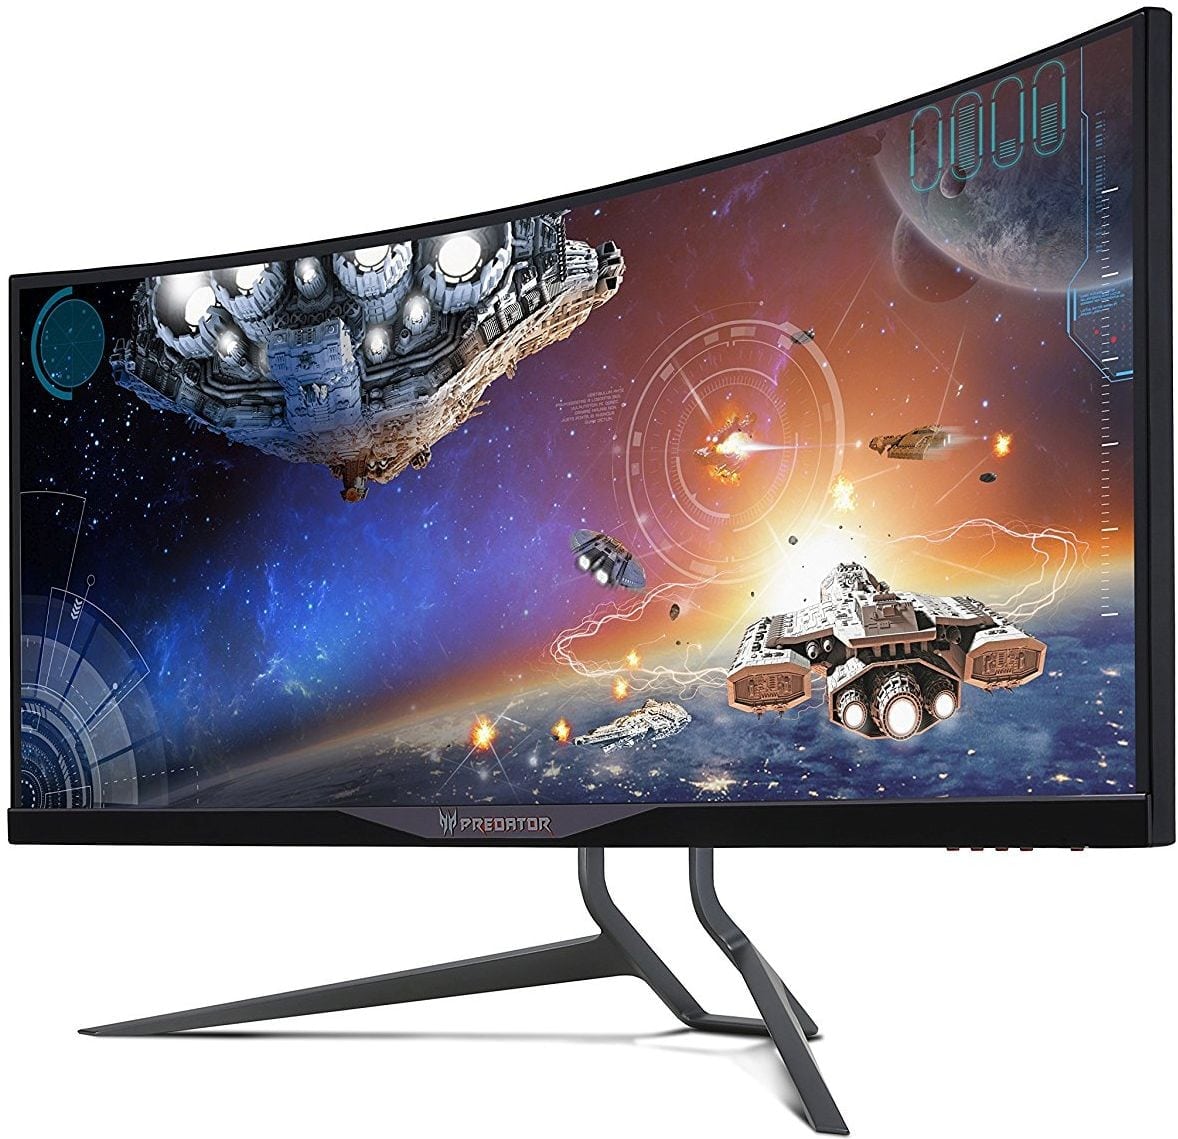 Top 3 Best Gaming Monitors in 2020: G-Sync, Budget and High-end